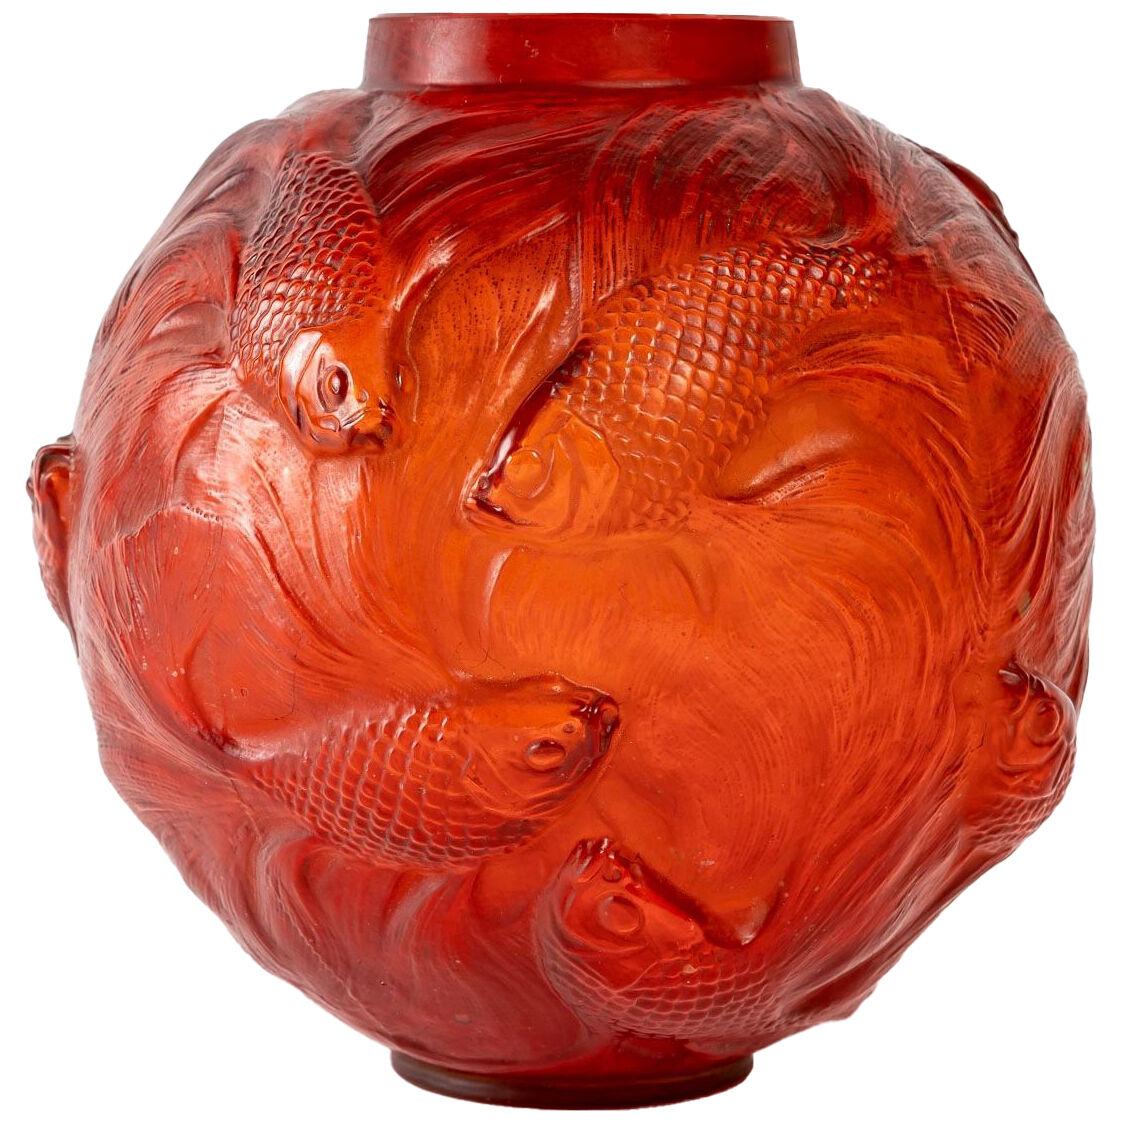 1924 René Lalique - Vase Formose Cased Tomato Red Glass With Grey Patina